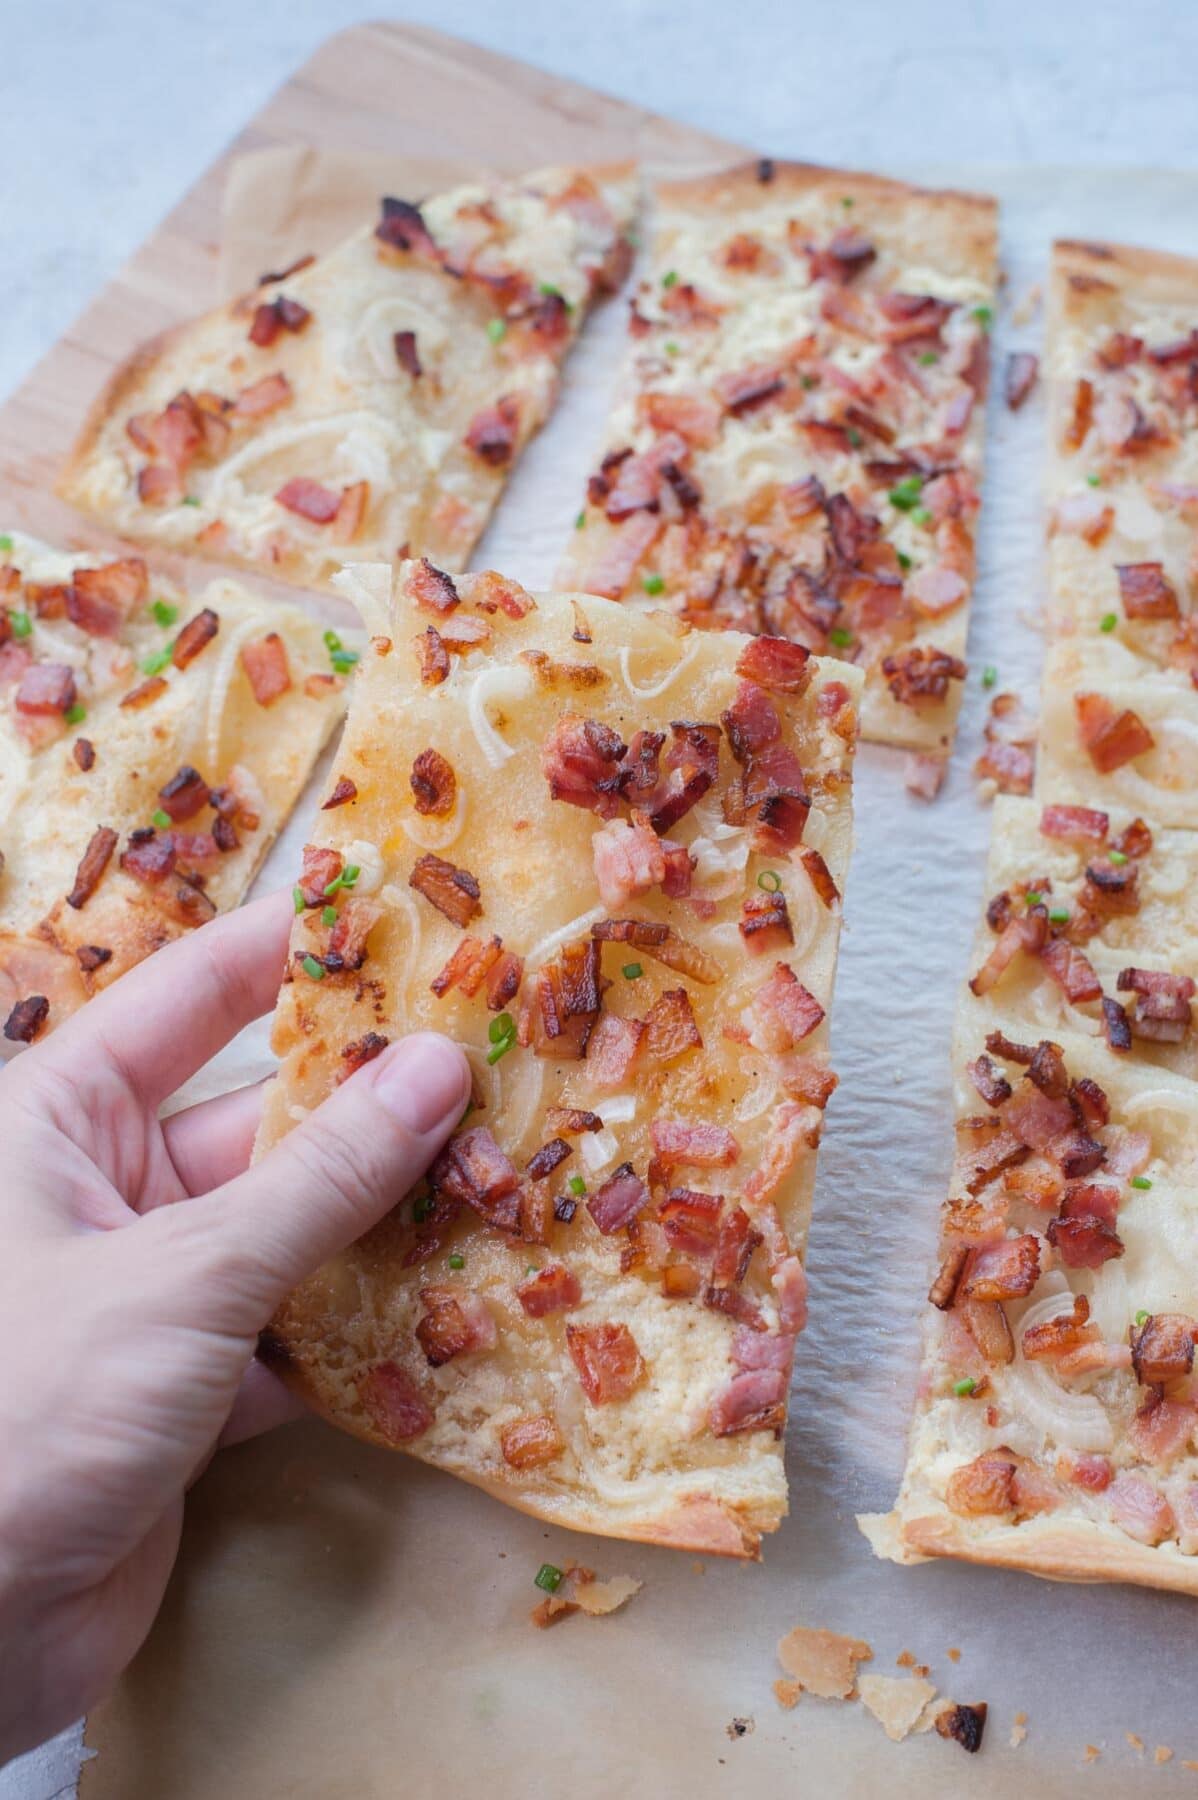 A piece of Flammkuchen is being held in a hand.